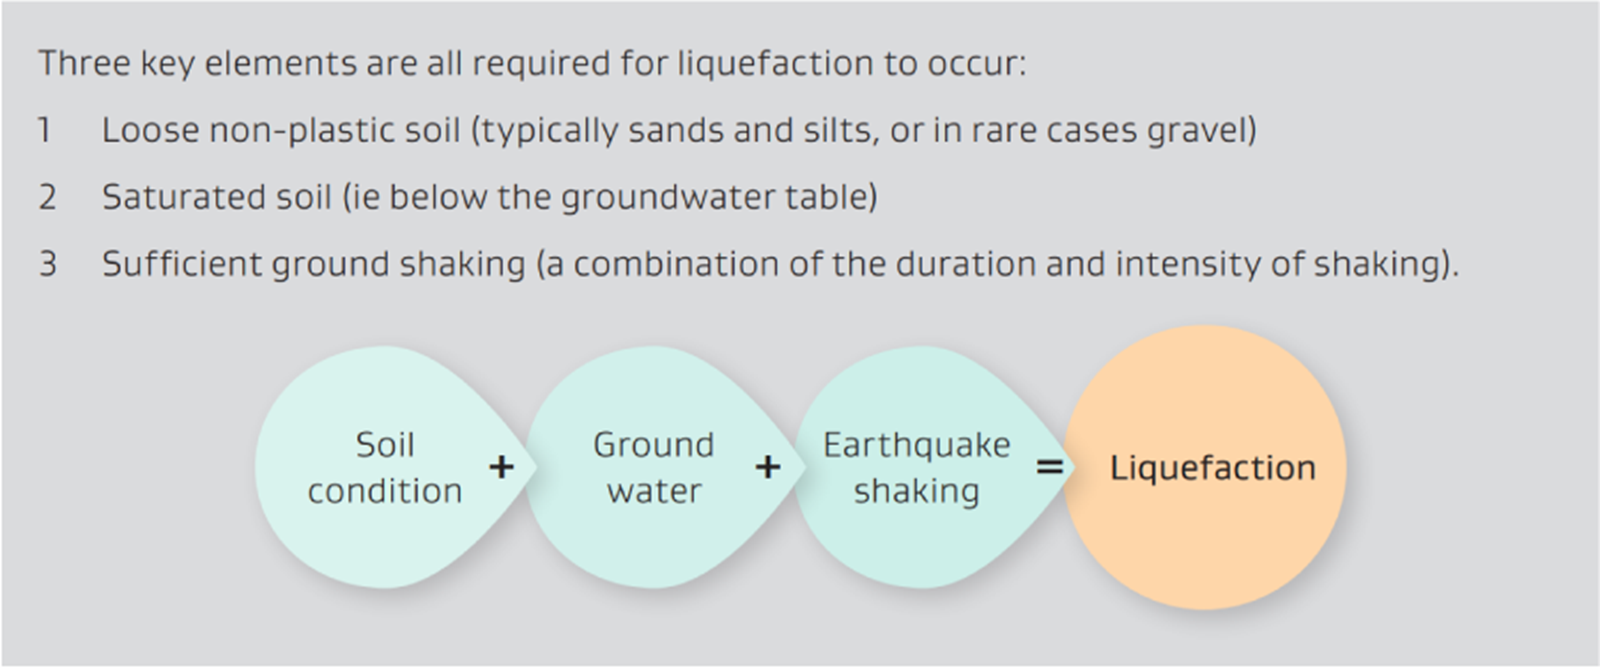 Three key elements are all required for liquefaction to occur